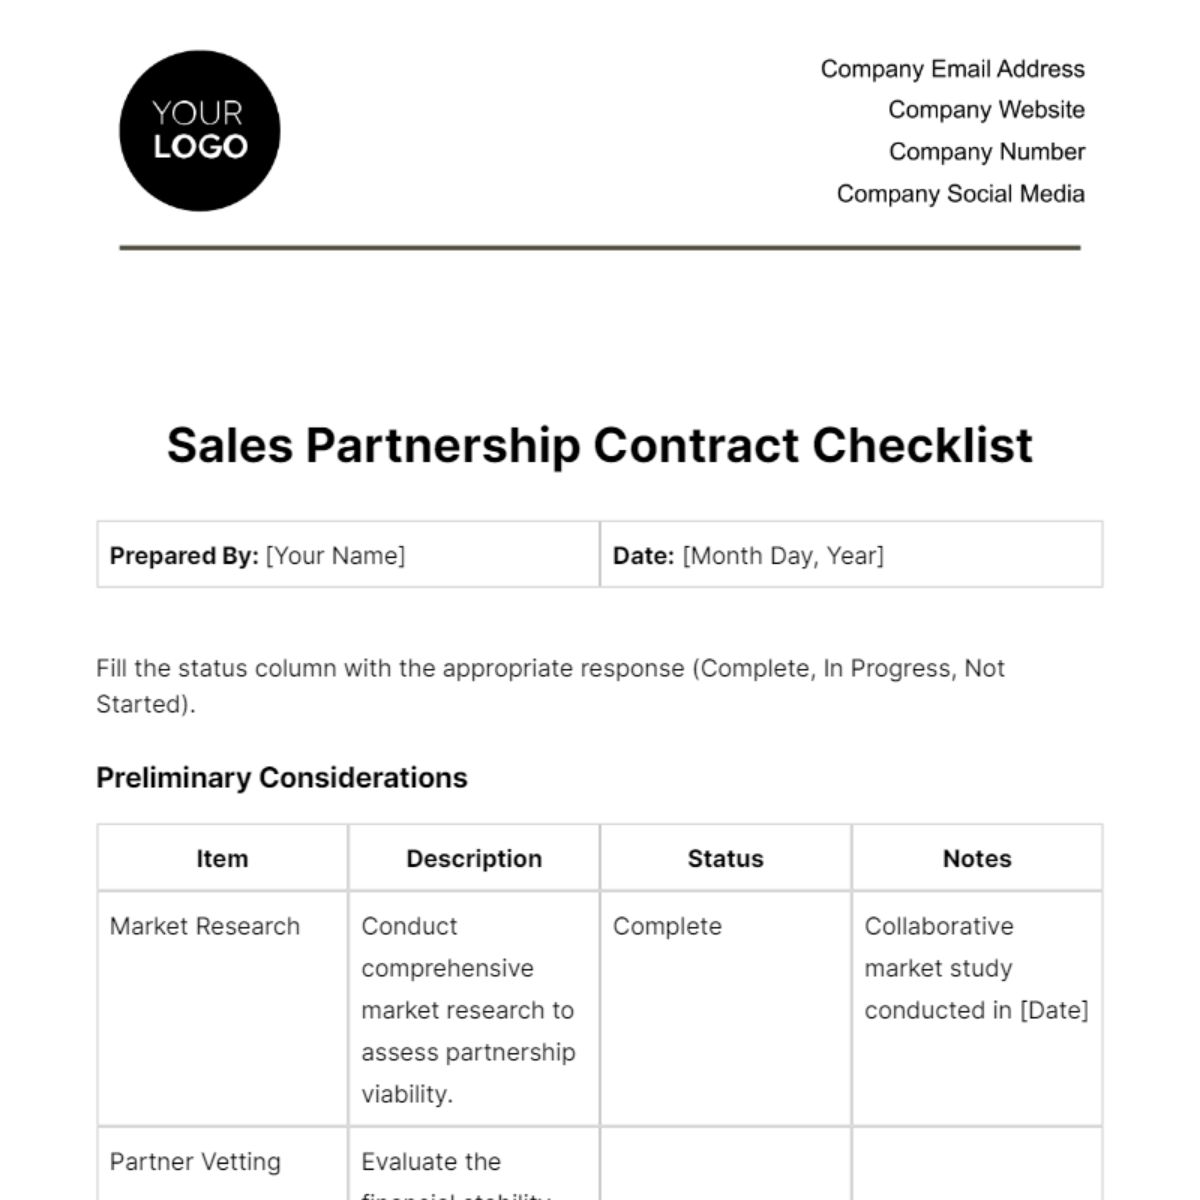 Sales Partnership Contract Checklist Template